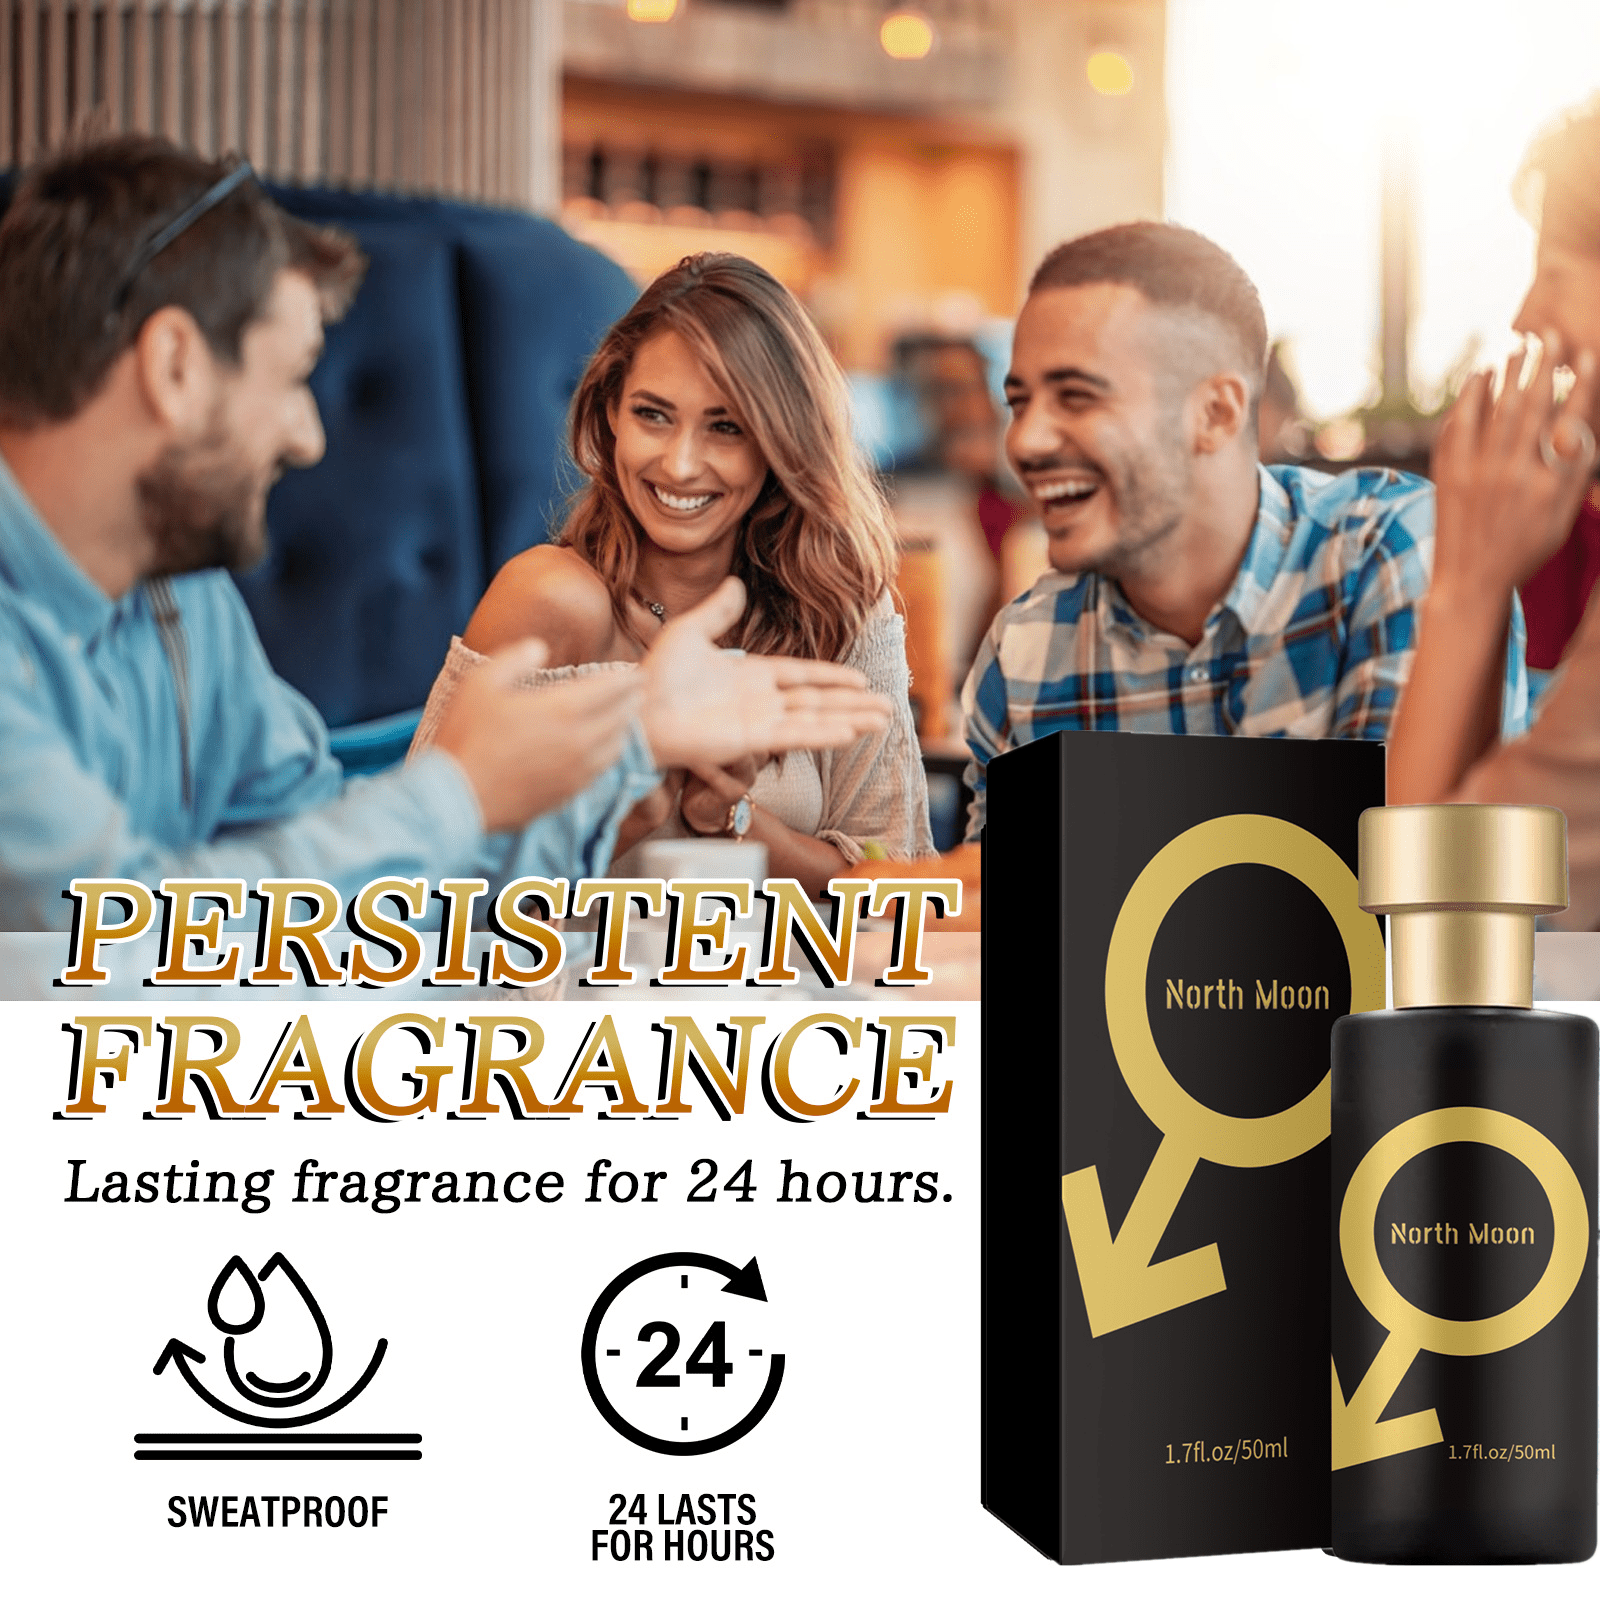 Pheromone Perfume Golden Lure, Luring Her Perfume, Pheromone Perfume to Attract  Men, Pheromone Colony for Men to Attract Women 